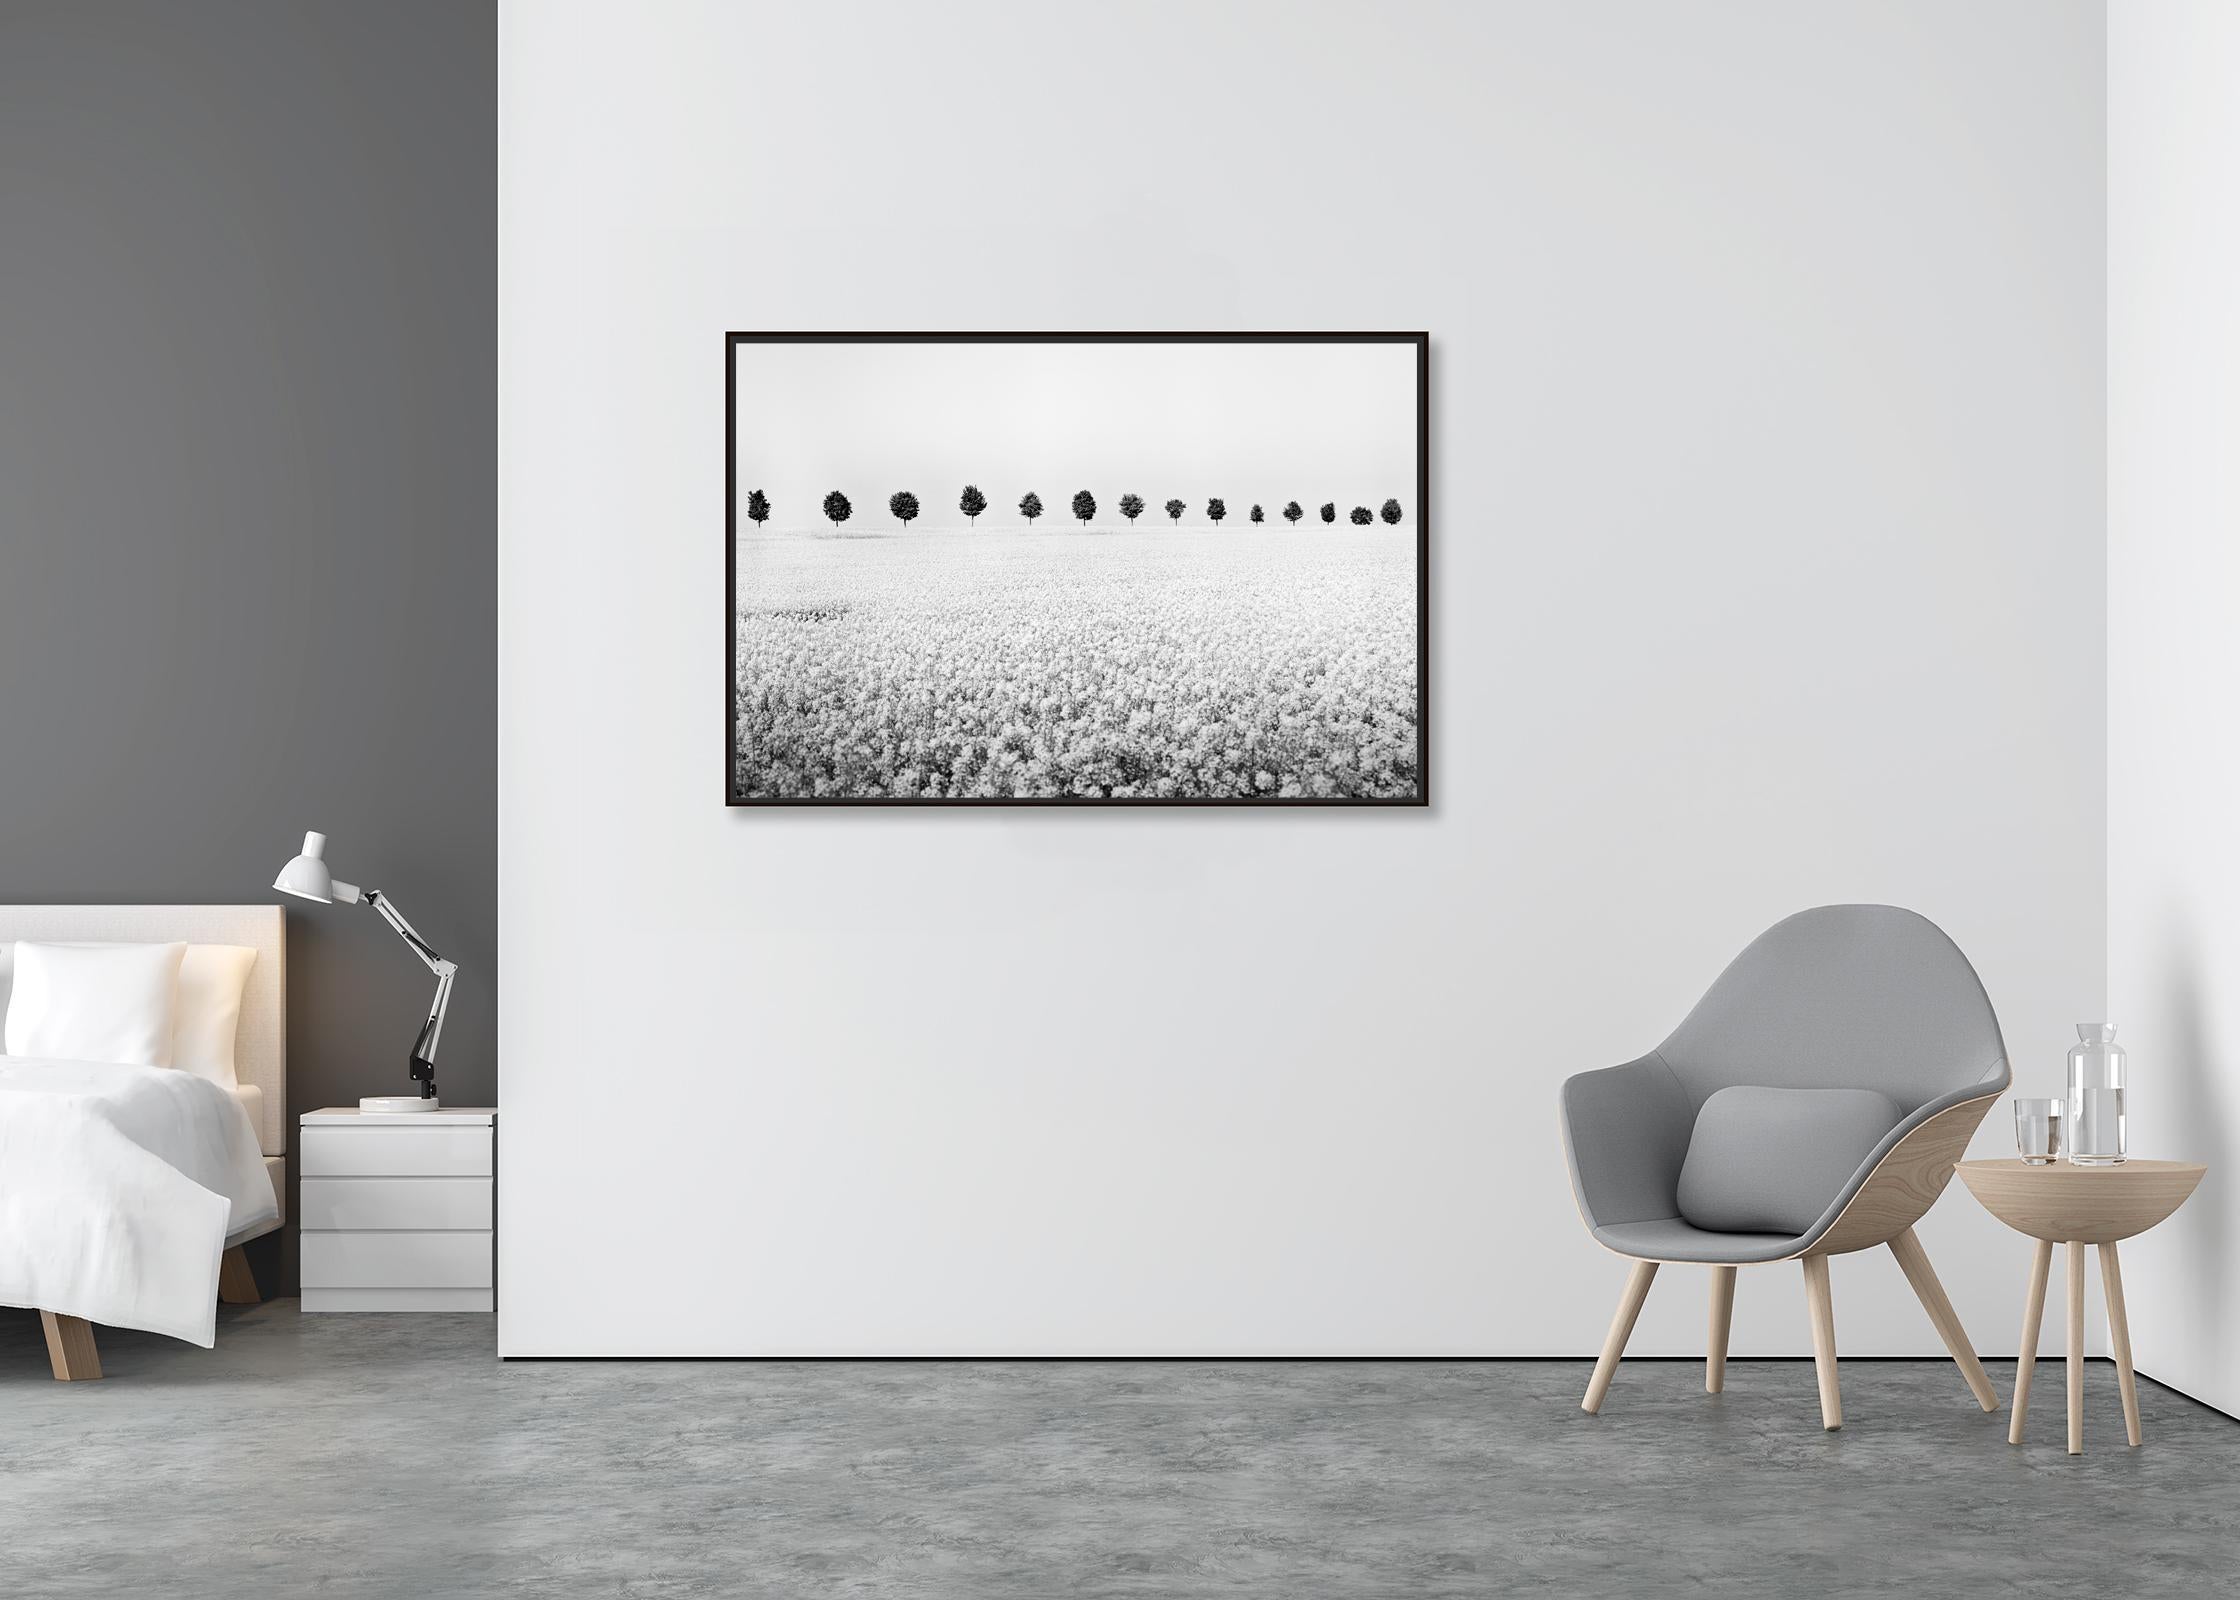 Brassica Napus row of trees black white minimalist landscape fineart photography - Minimalist Photograph by Gerald Berghammer